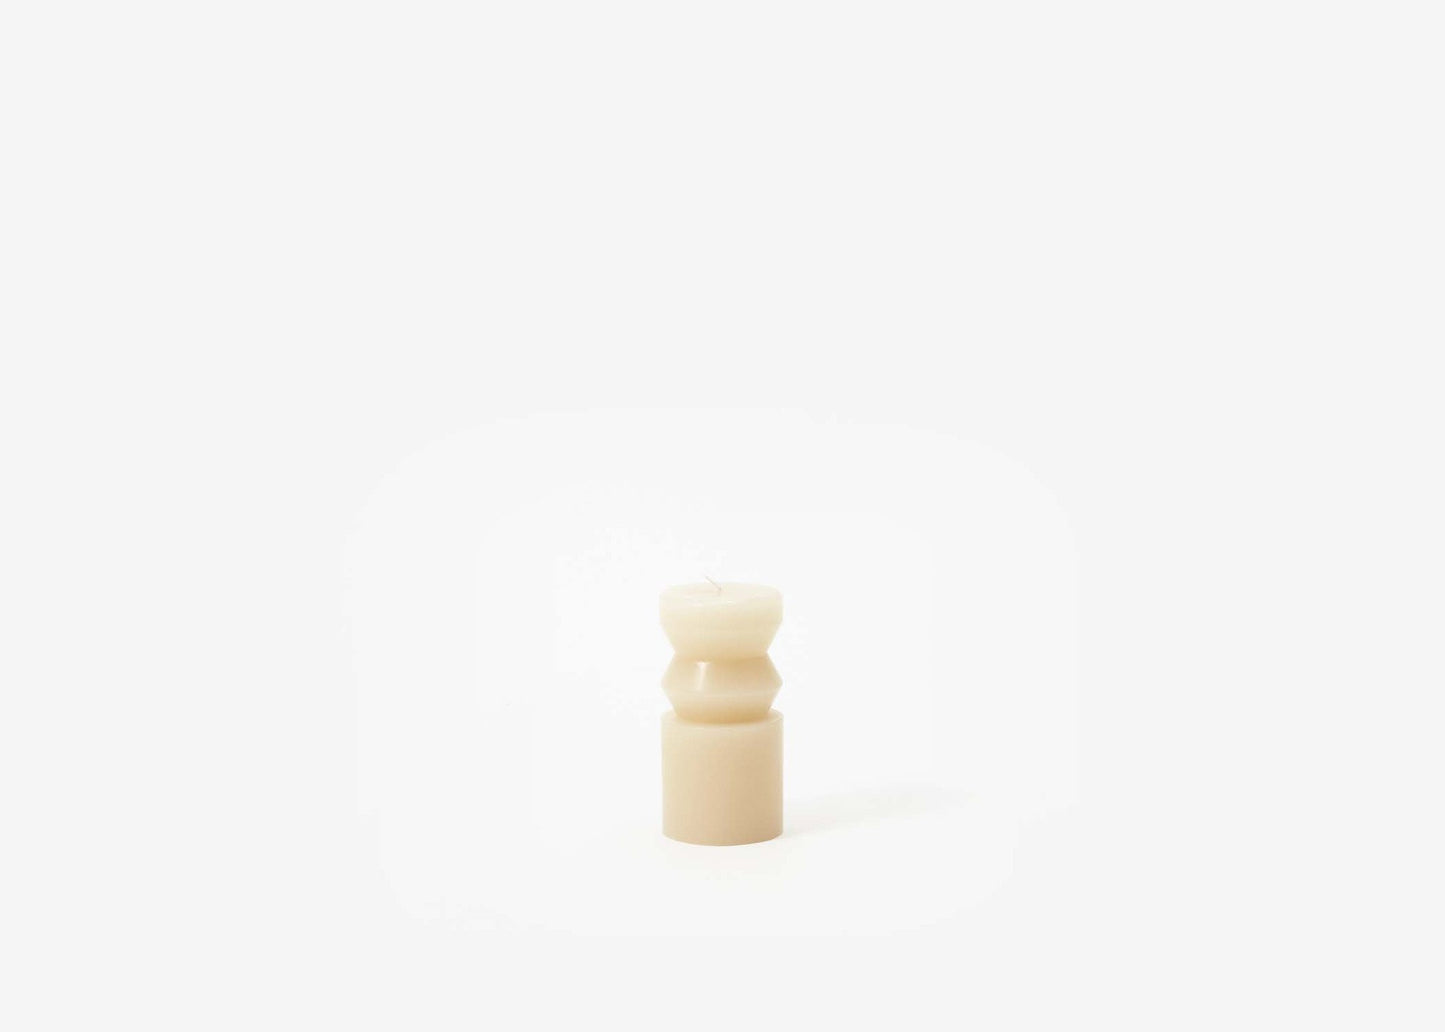 Areawear Totum Candle in Sand, Small. Available at Easy Tiger Goods Toronto.